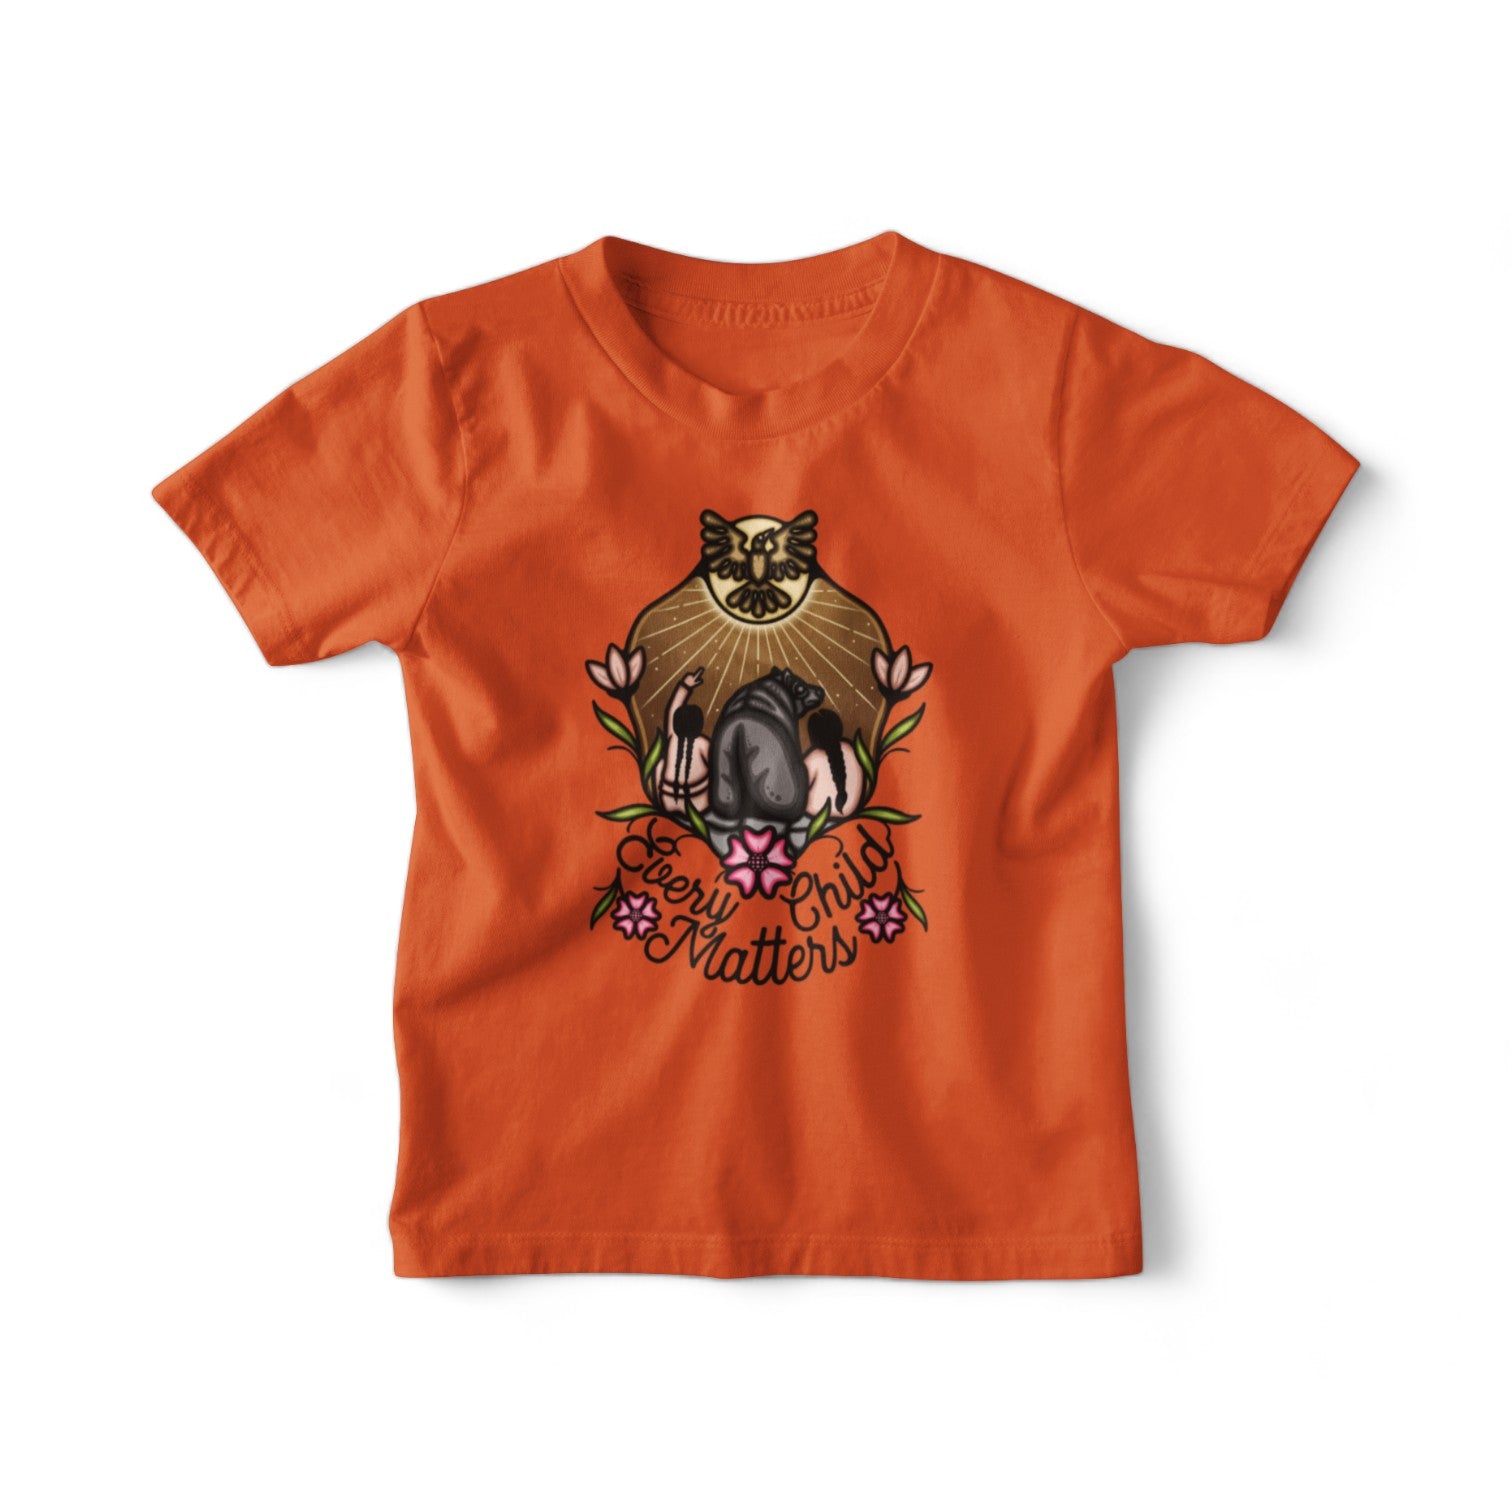 Every Child Matters 'Guardians' T-shirt (Youth)